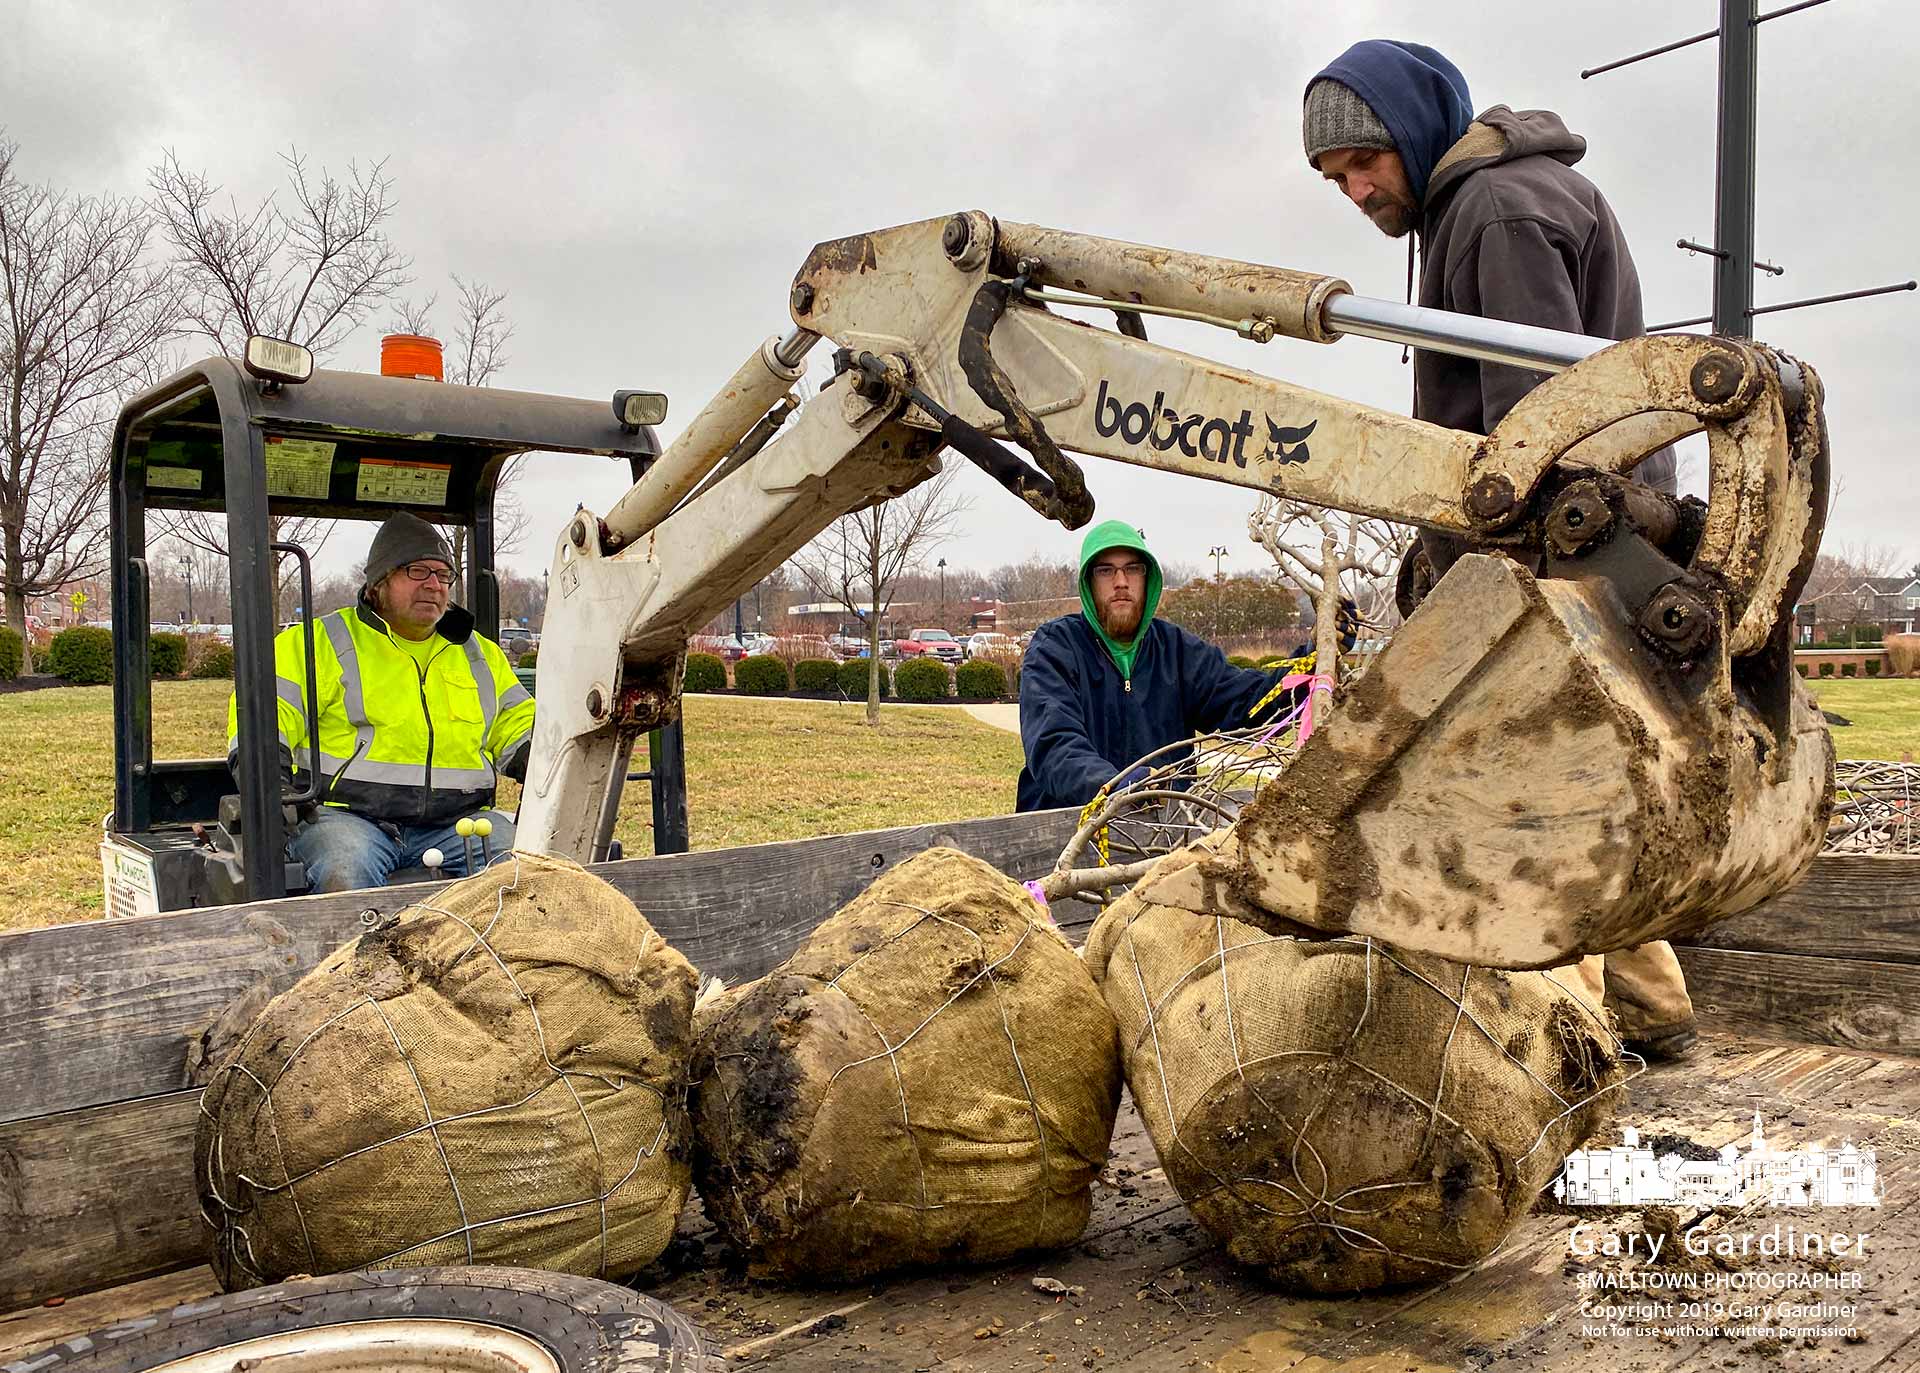 Klamfoth Landscaping workers unload three of the four trees they planted Tuesday along the east side of State Street just north of Schrock Rd. replacing trees that died during the last year and the sandy soil they were planted in. My Final Photo for Dec. 3, 2019.